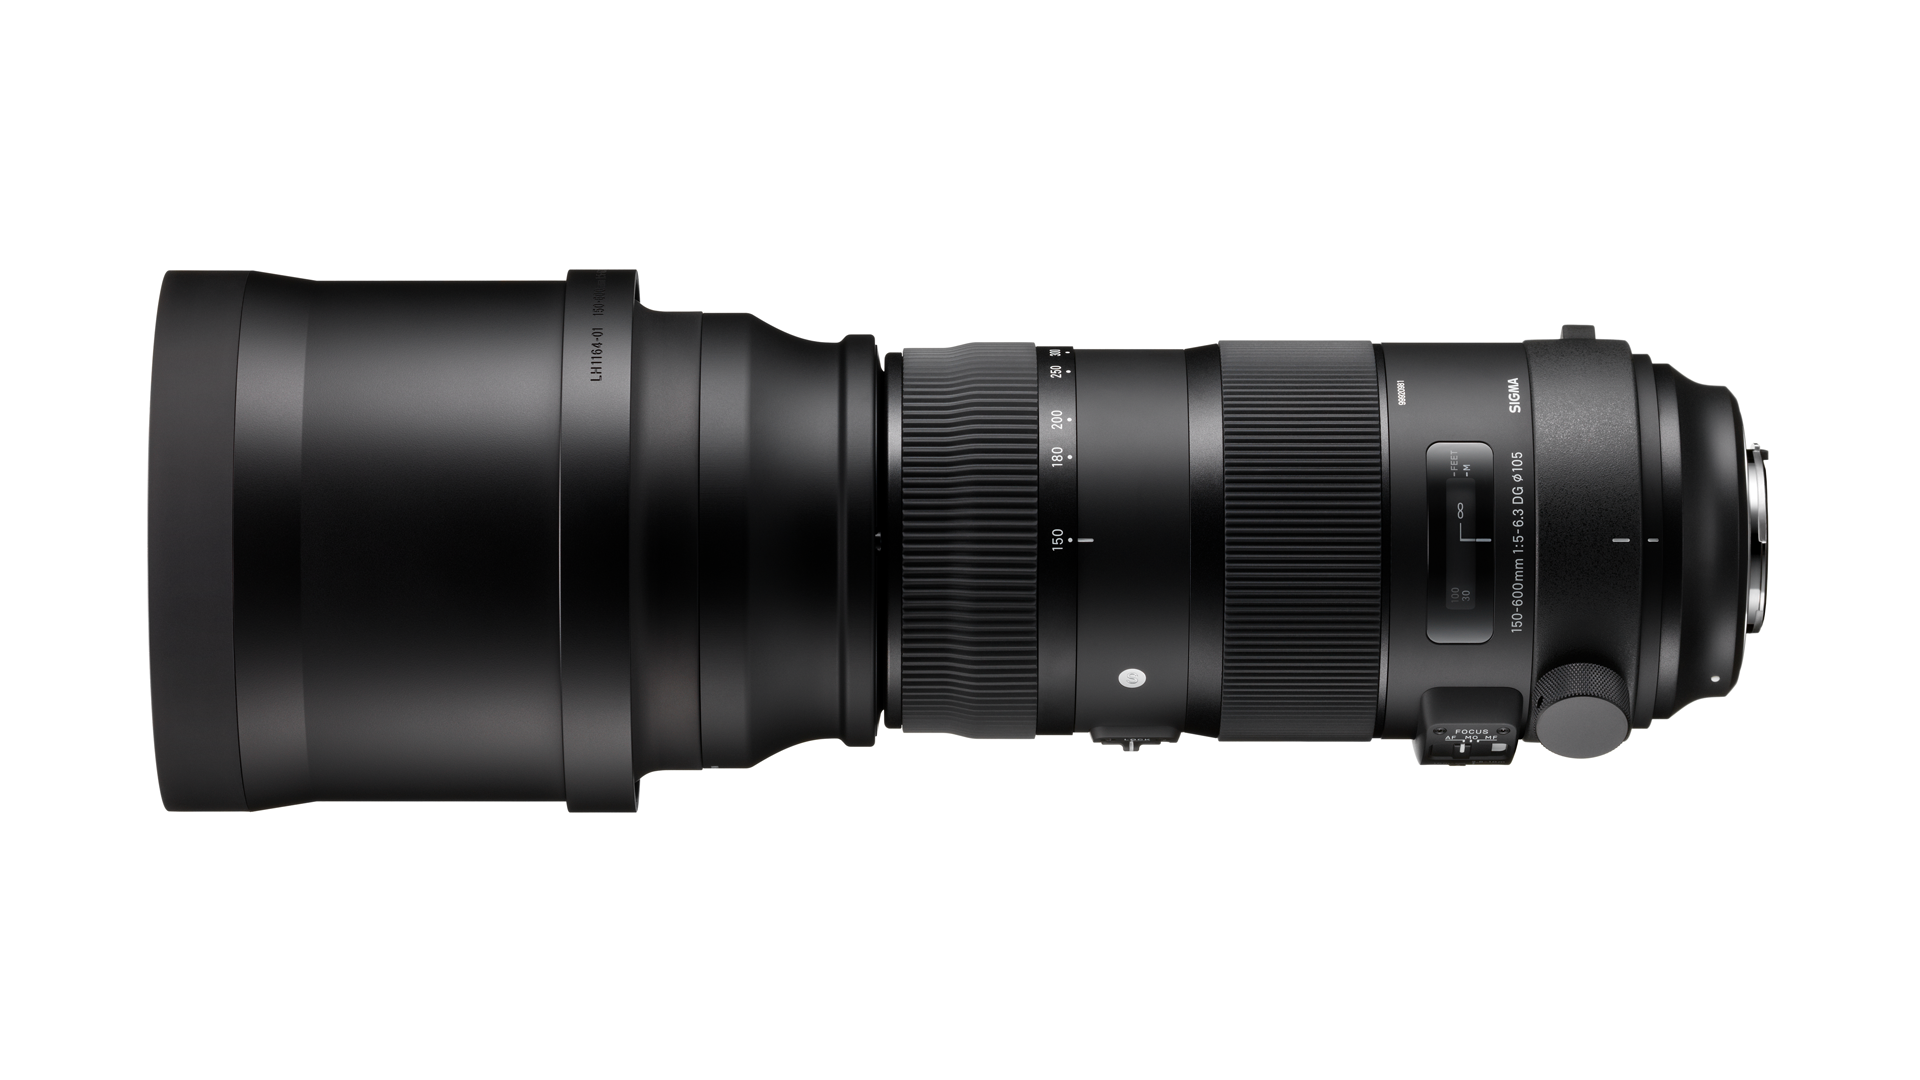 The SIGMA 150-600mm F5-6.3 DG OS HSM | Contemporary versus the 150